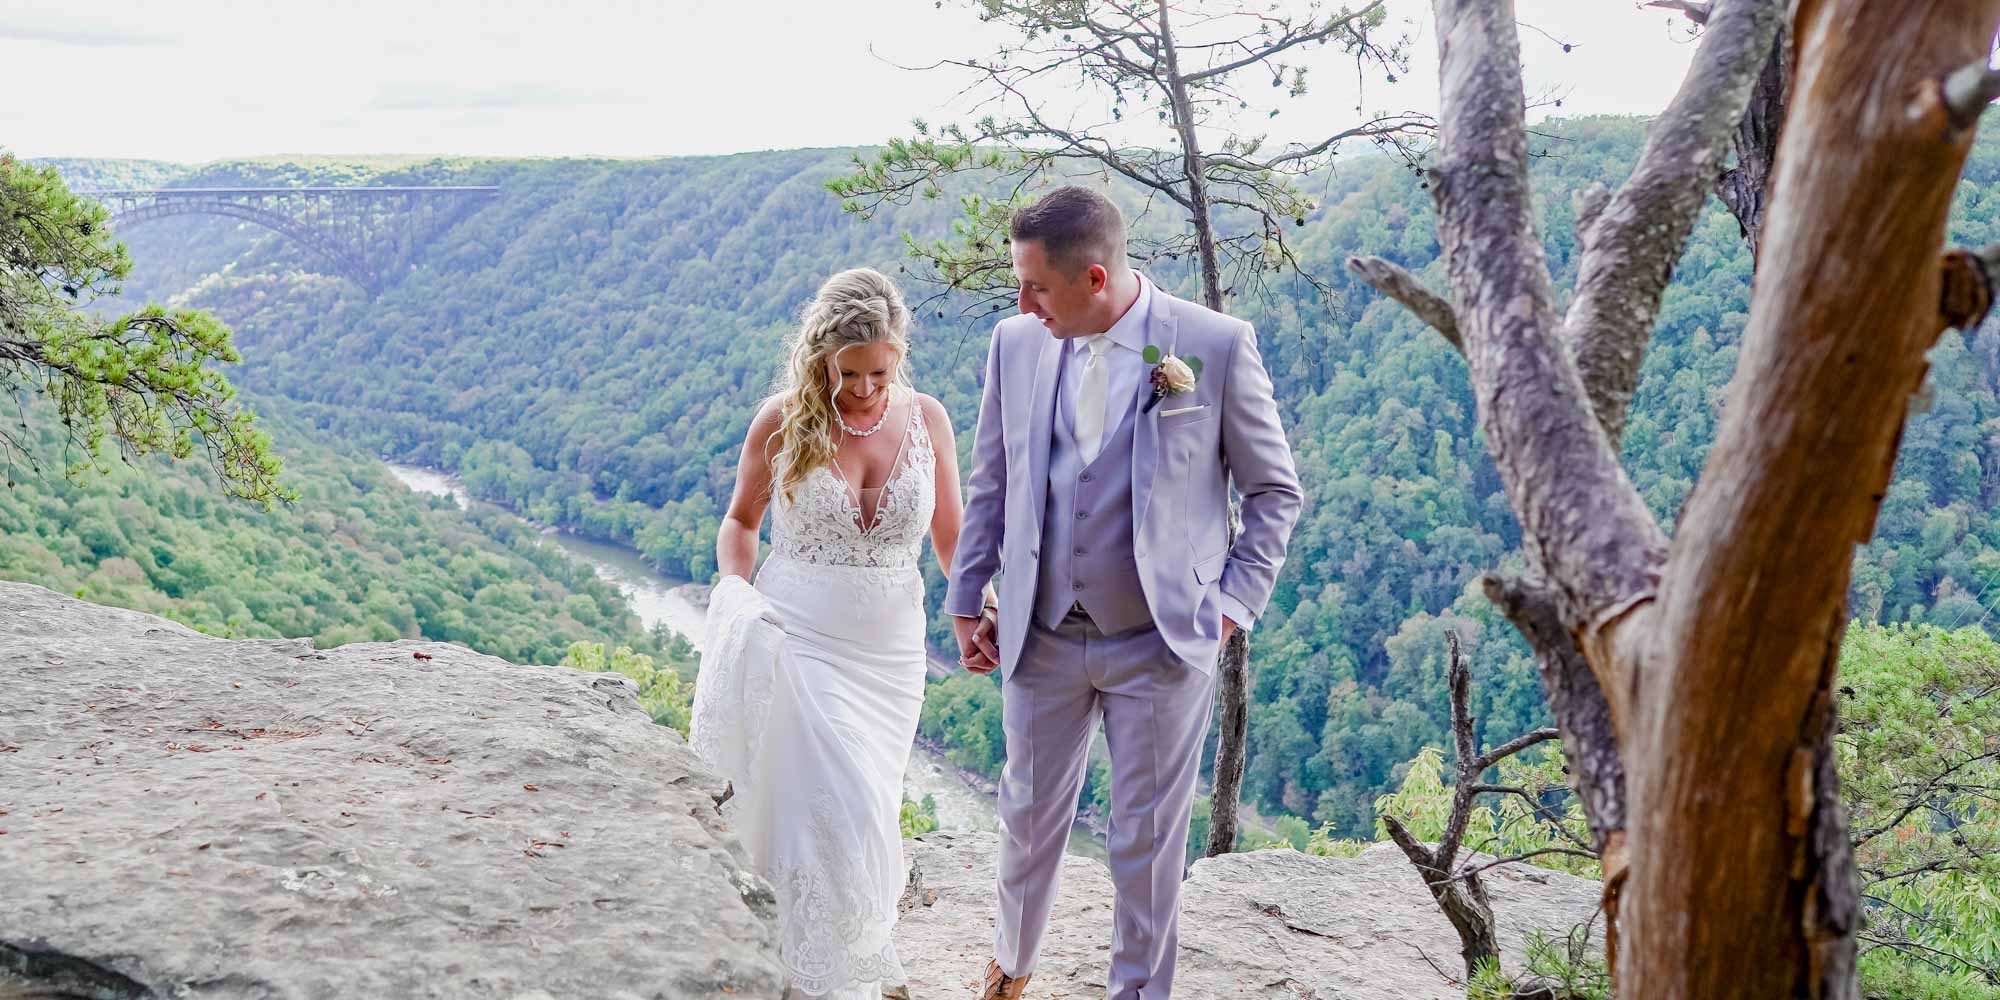 Weddings at Adventures on the Gorge